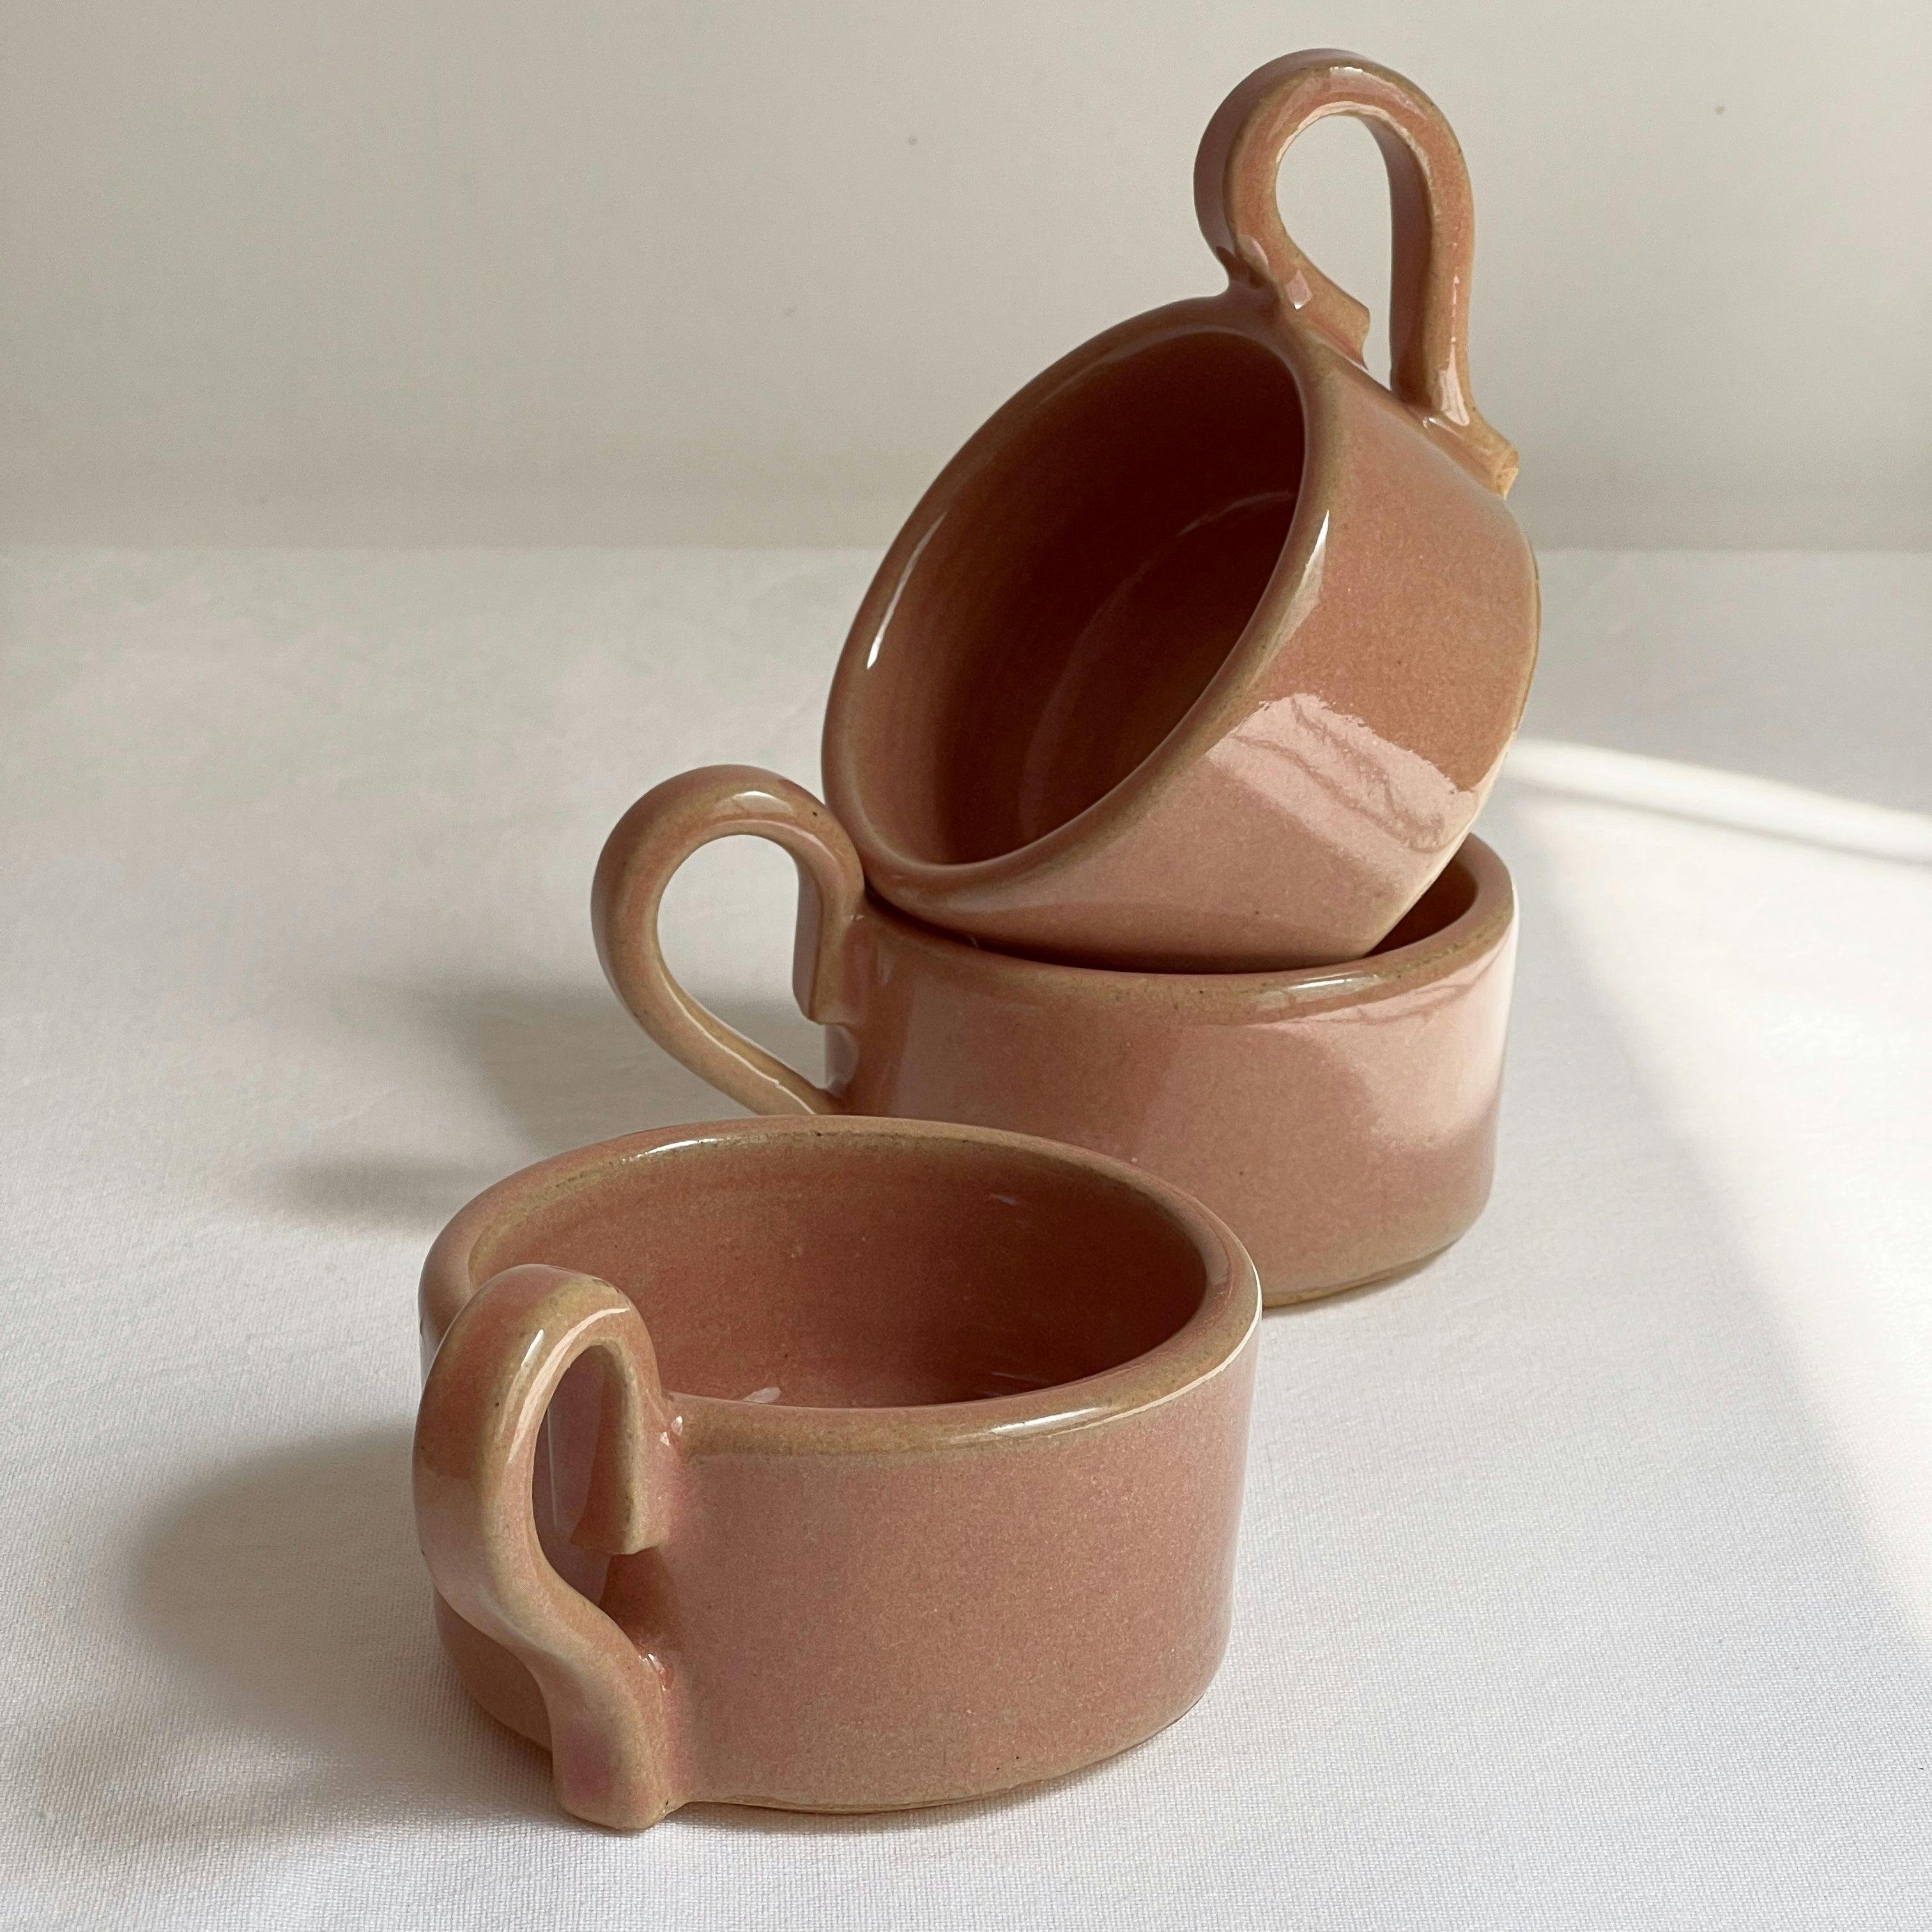 Everyday Cup in Sienna, a product by Midori Collective